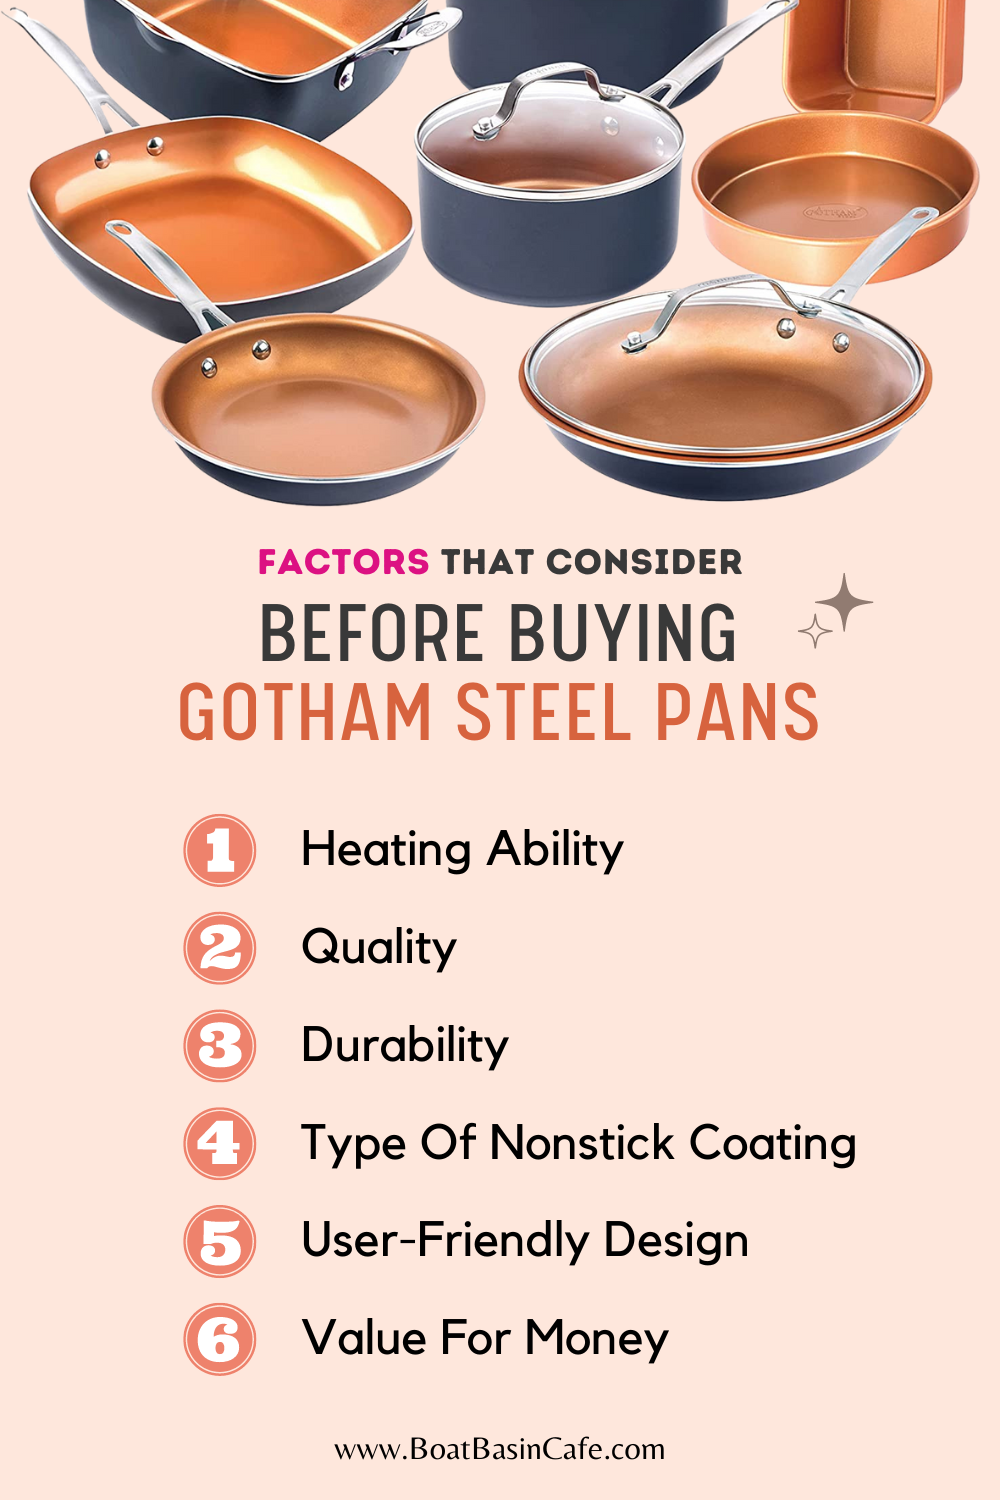 https://boatbasincafe.com/wp-content/uploads/2022/11/Factors-To-Consider-Before-Buying-Gotham-Steel-Pans.png